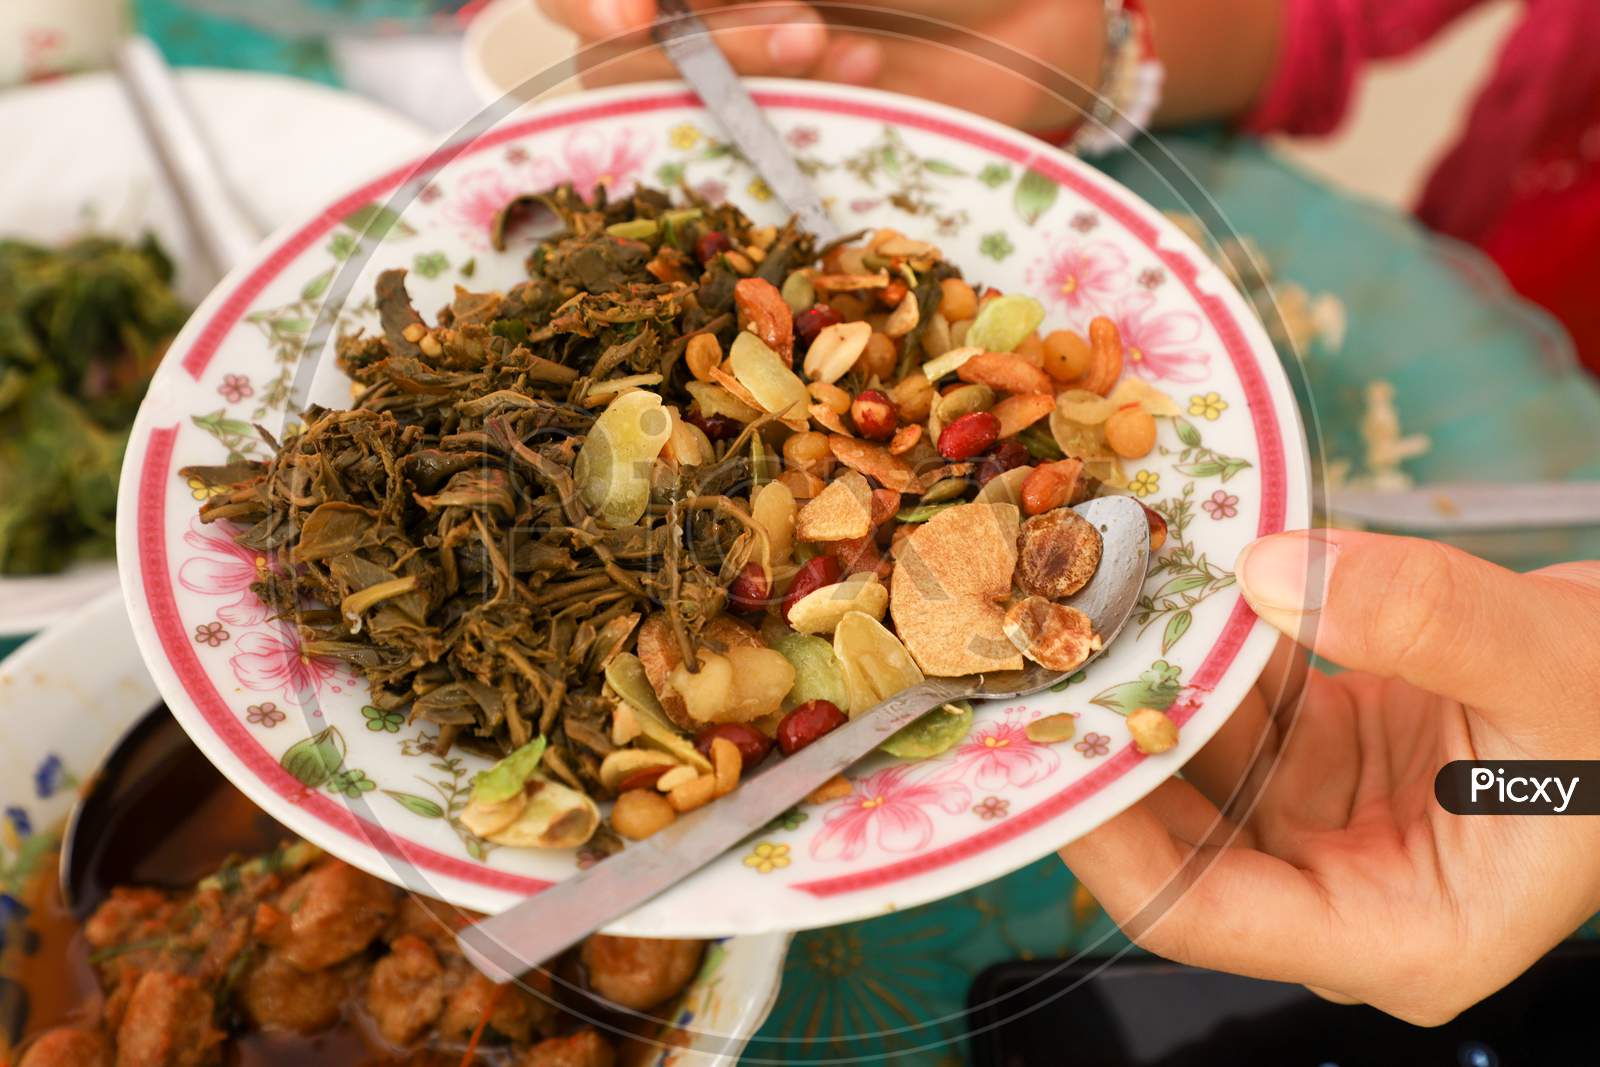 Burmese Dish Served in a Plate